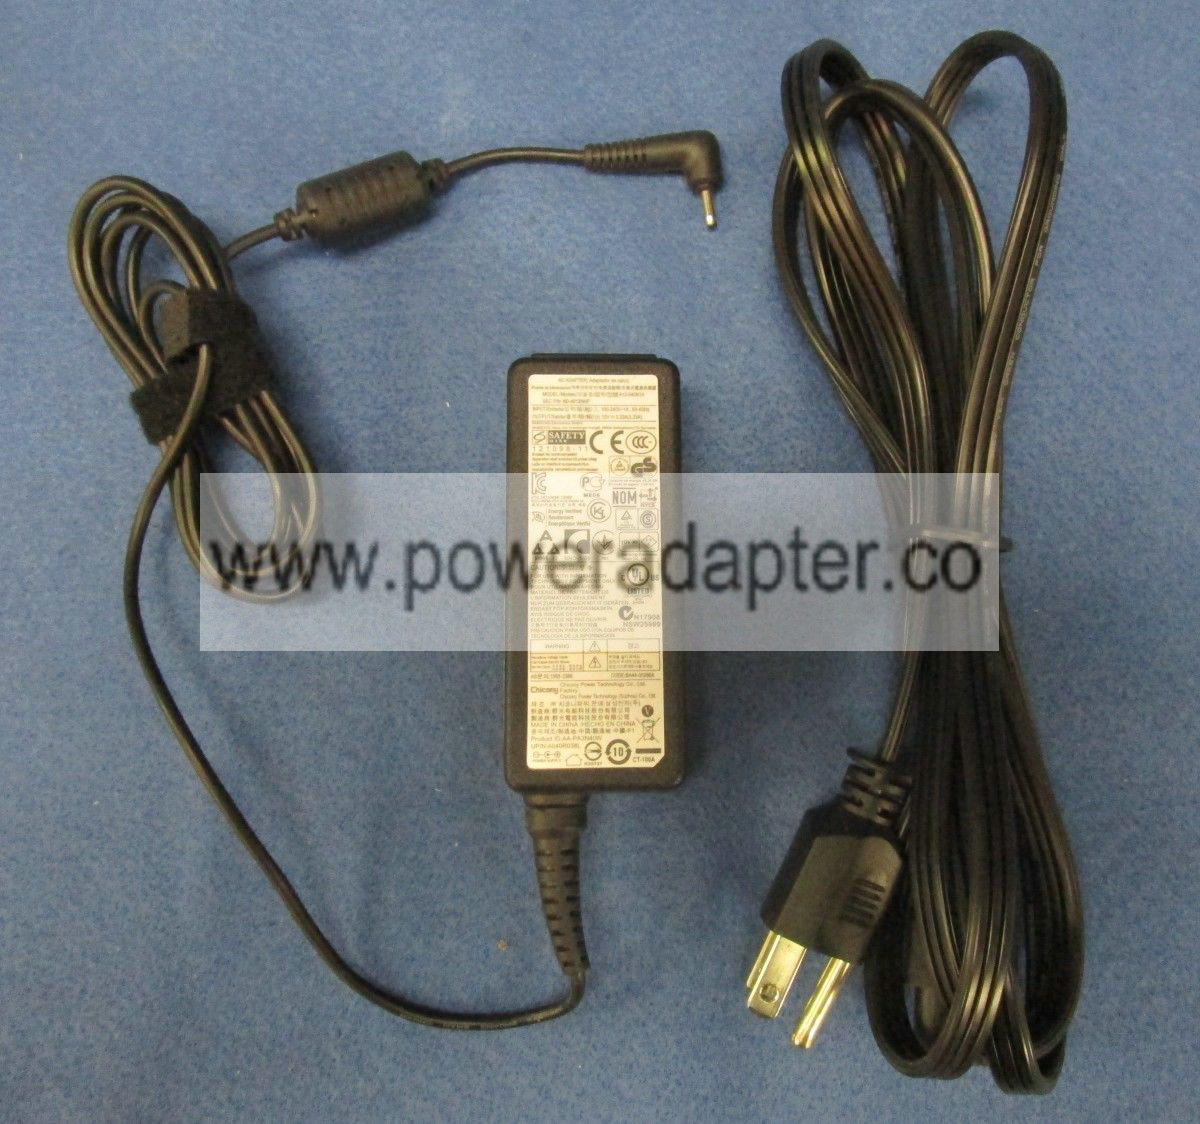 Genuine Samsung Chromebook A12-040N1A 40W AC Power Adapter AD-4012NHF Bundled Items: Power Cable Type: AC/Standard M